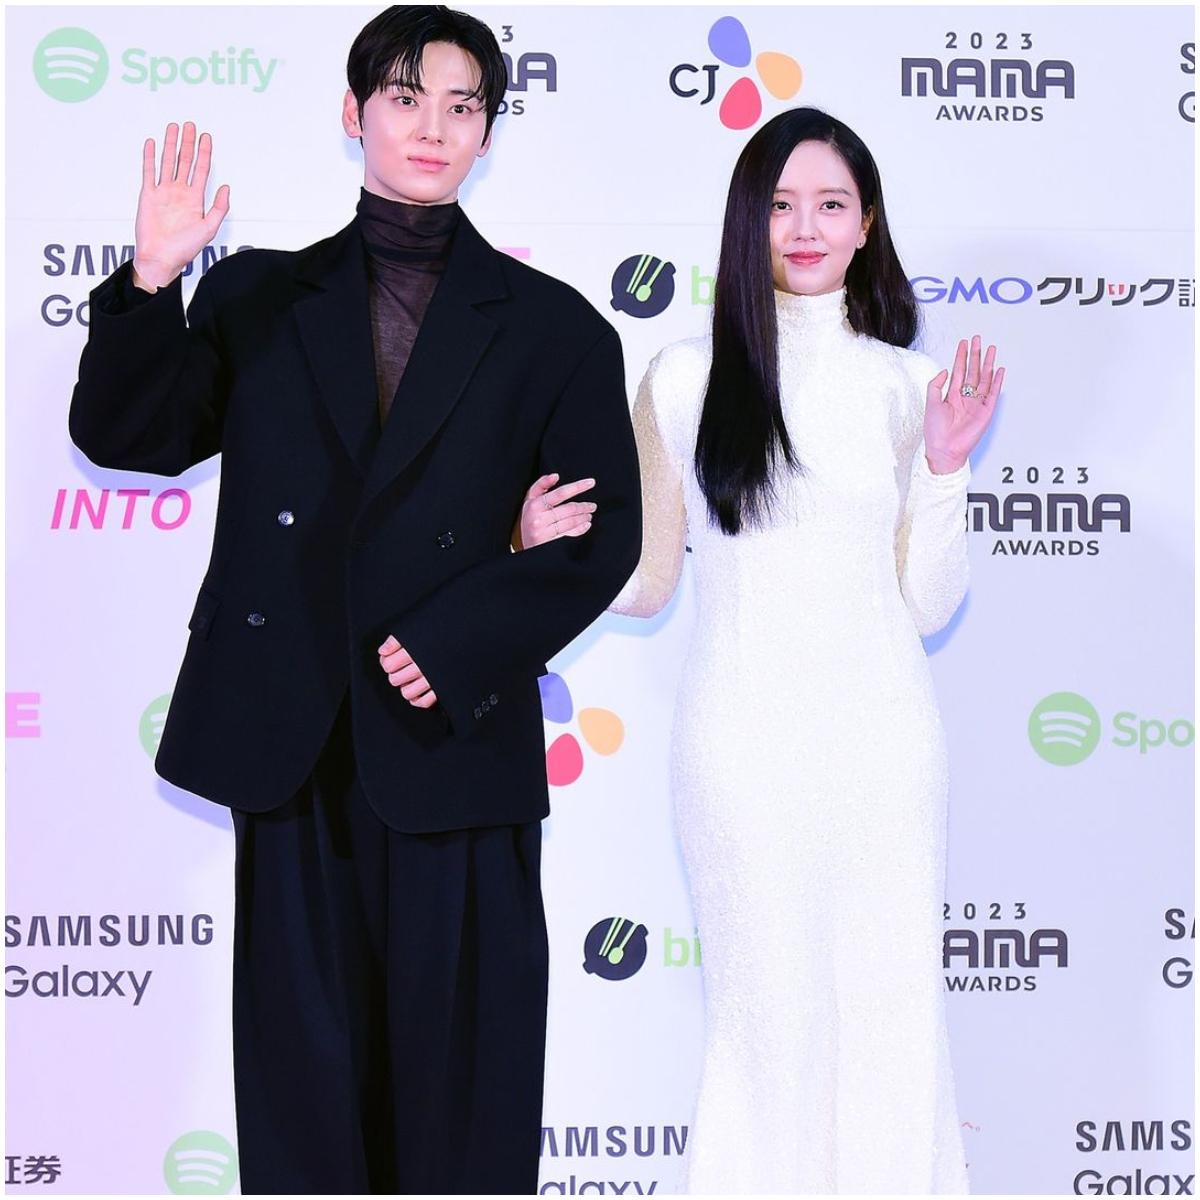 South Korean singer and actor Hwang Min-hyun, known as Minhyun, attended the awards with his My Lovely Liar co-star Kim So Hyun